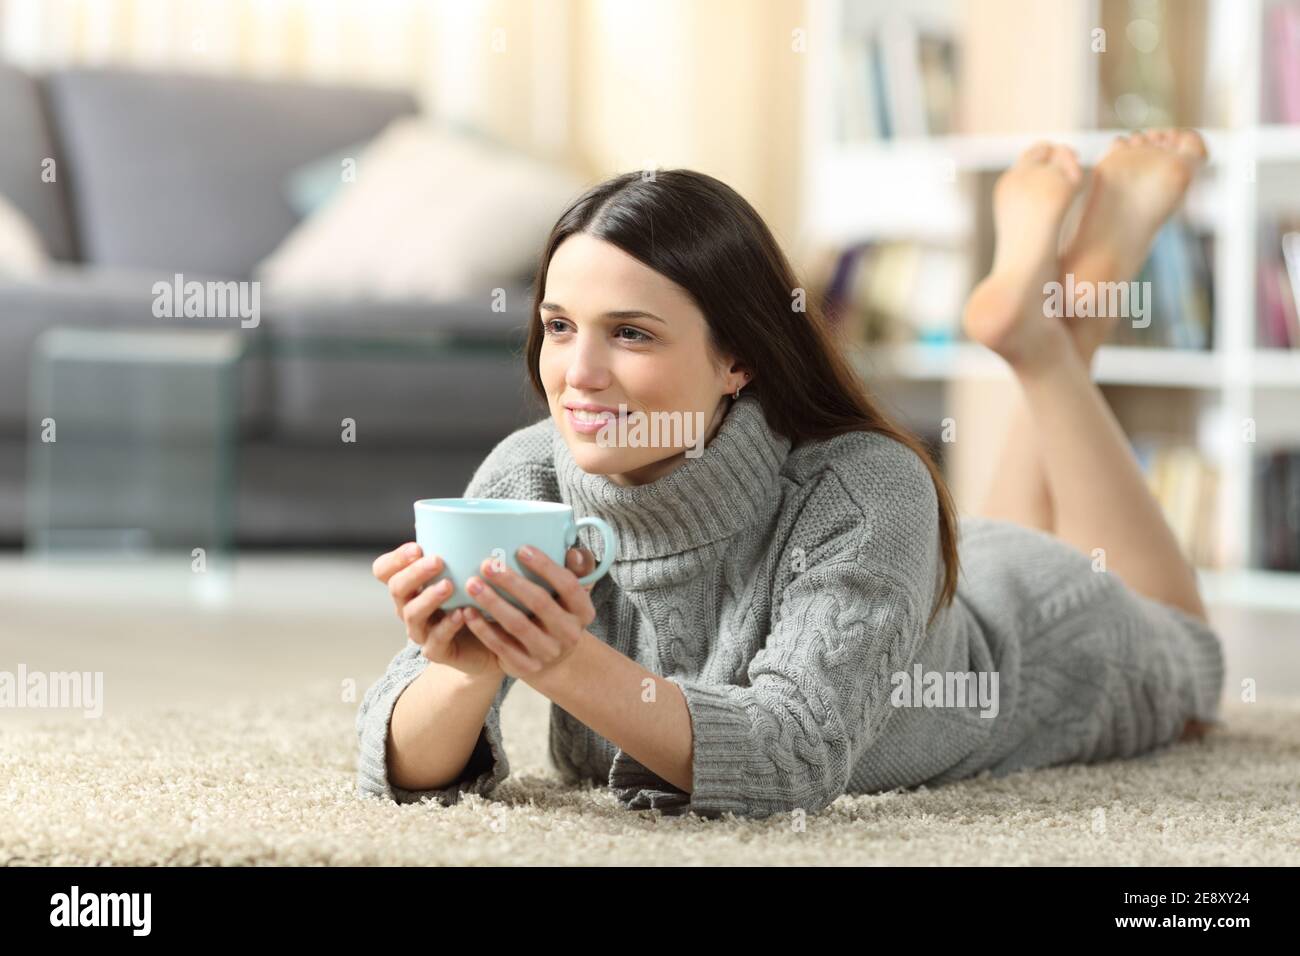 Full body portrait of a relaxed woman drinking coffee at home lying on the floor Stock Photo